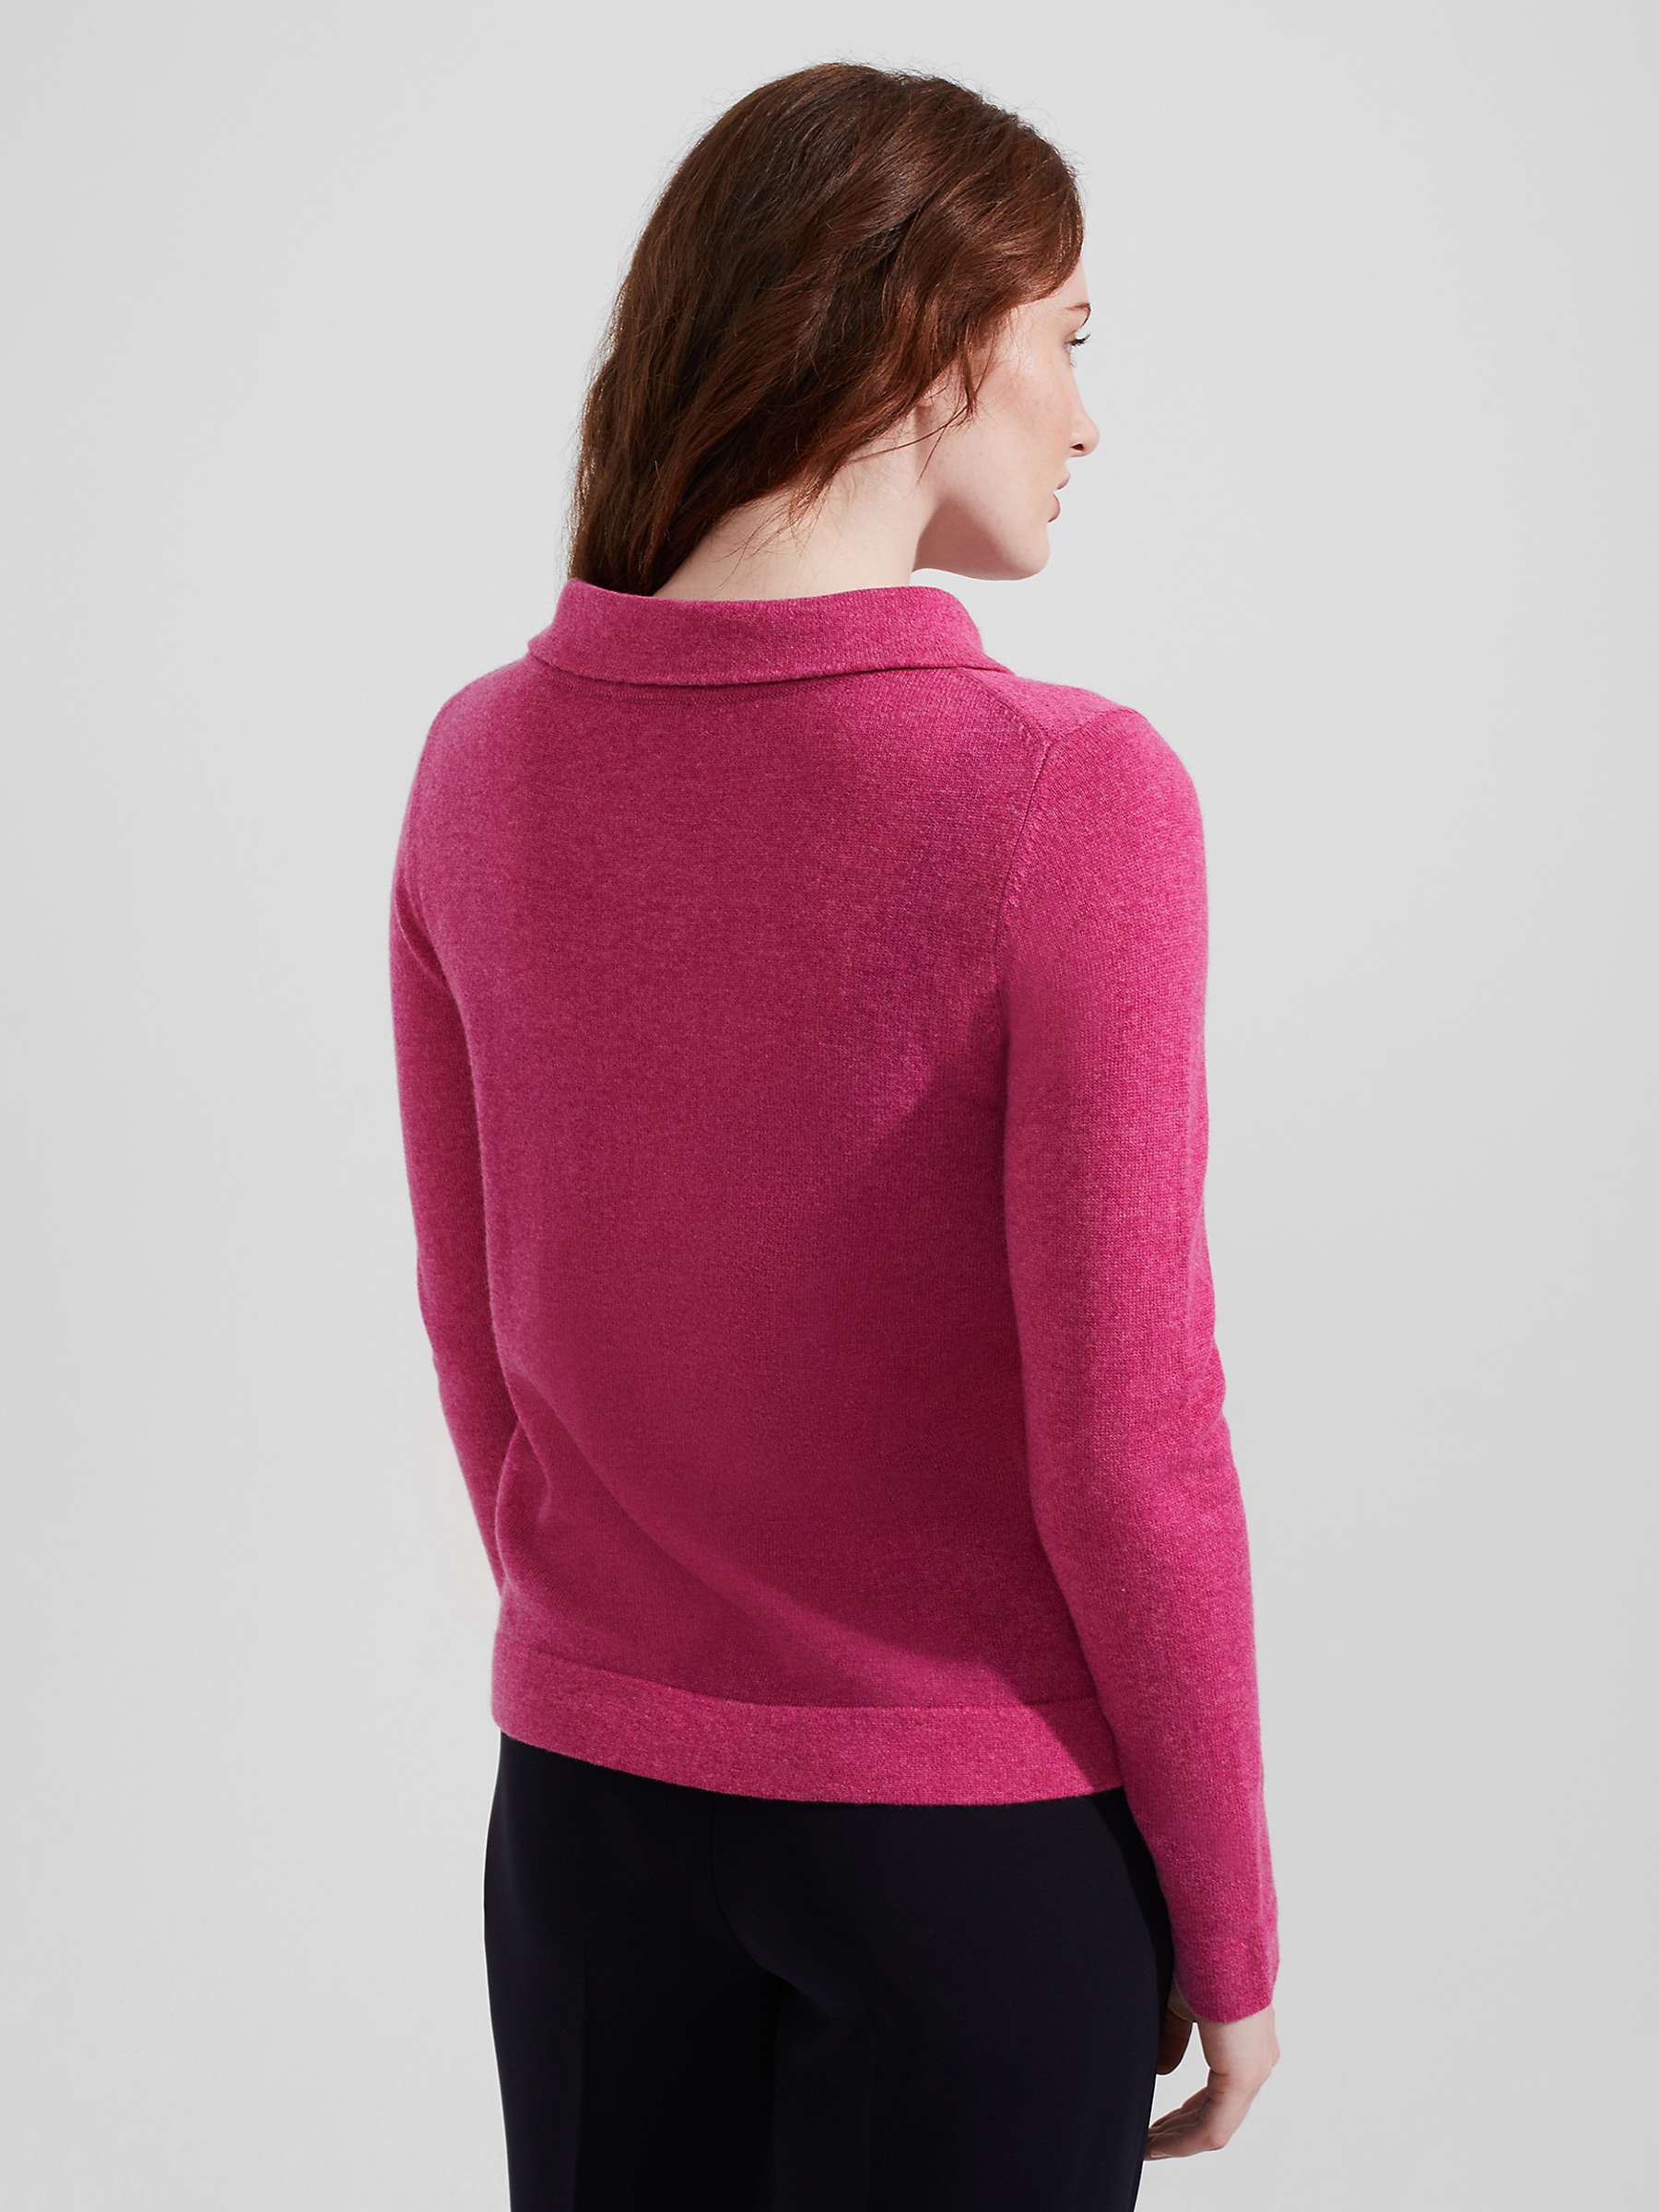 Buy Hobbs Audrey Cashmere and Wool Jumper Online at johnlewis.com